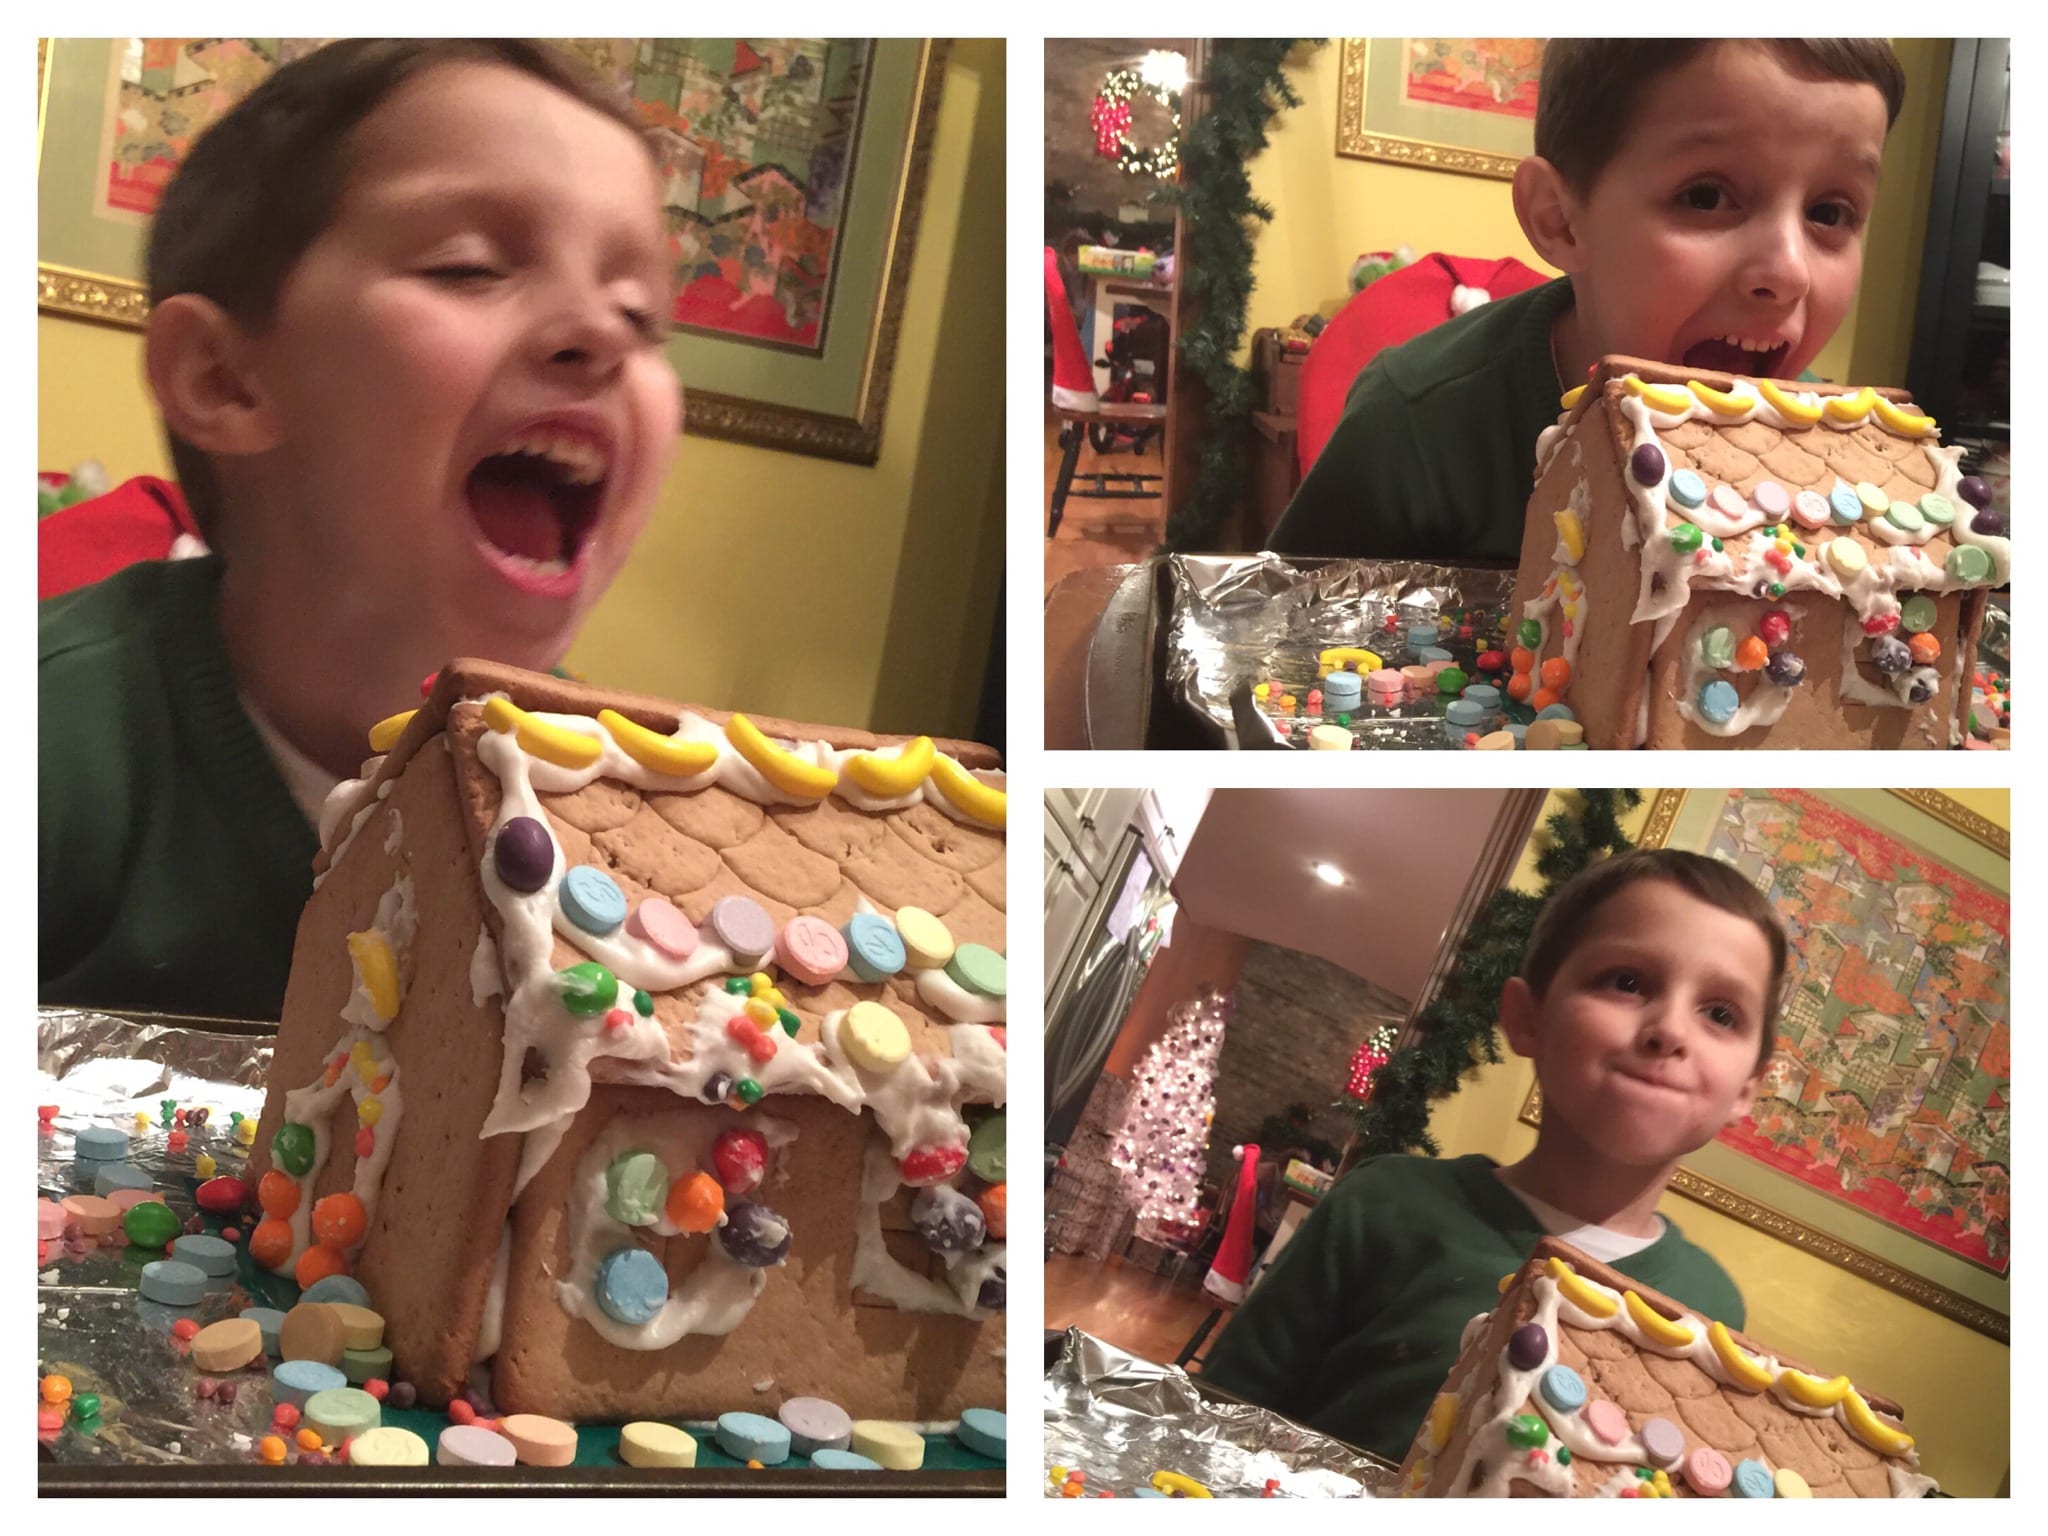 Daniel is hungry for the gingerbread house